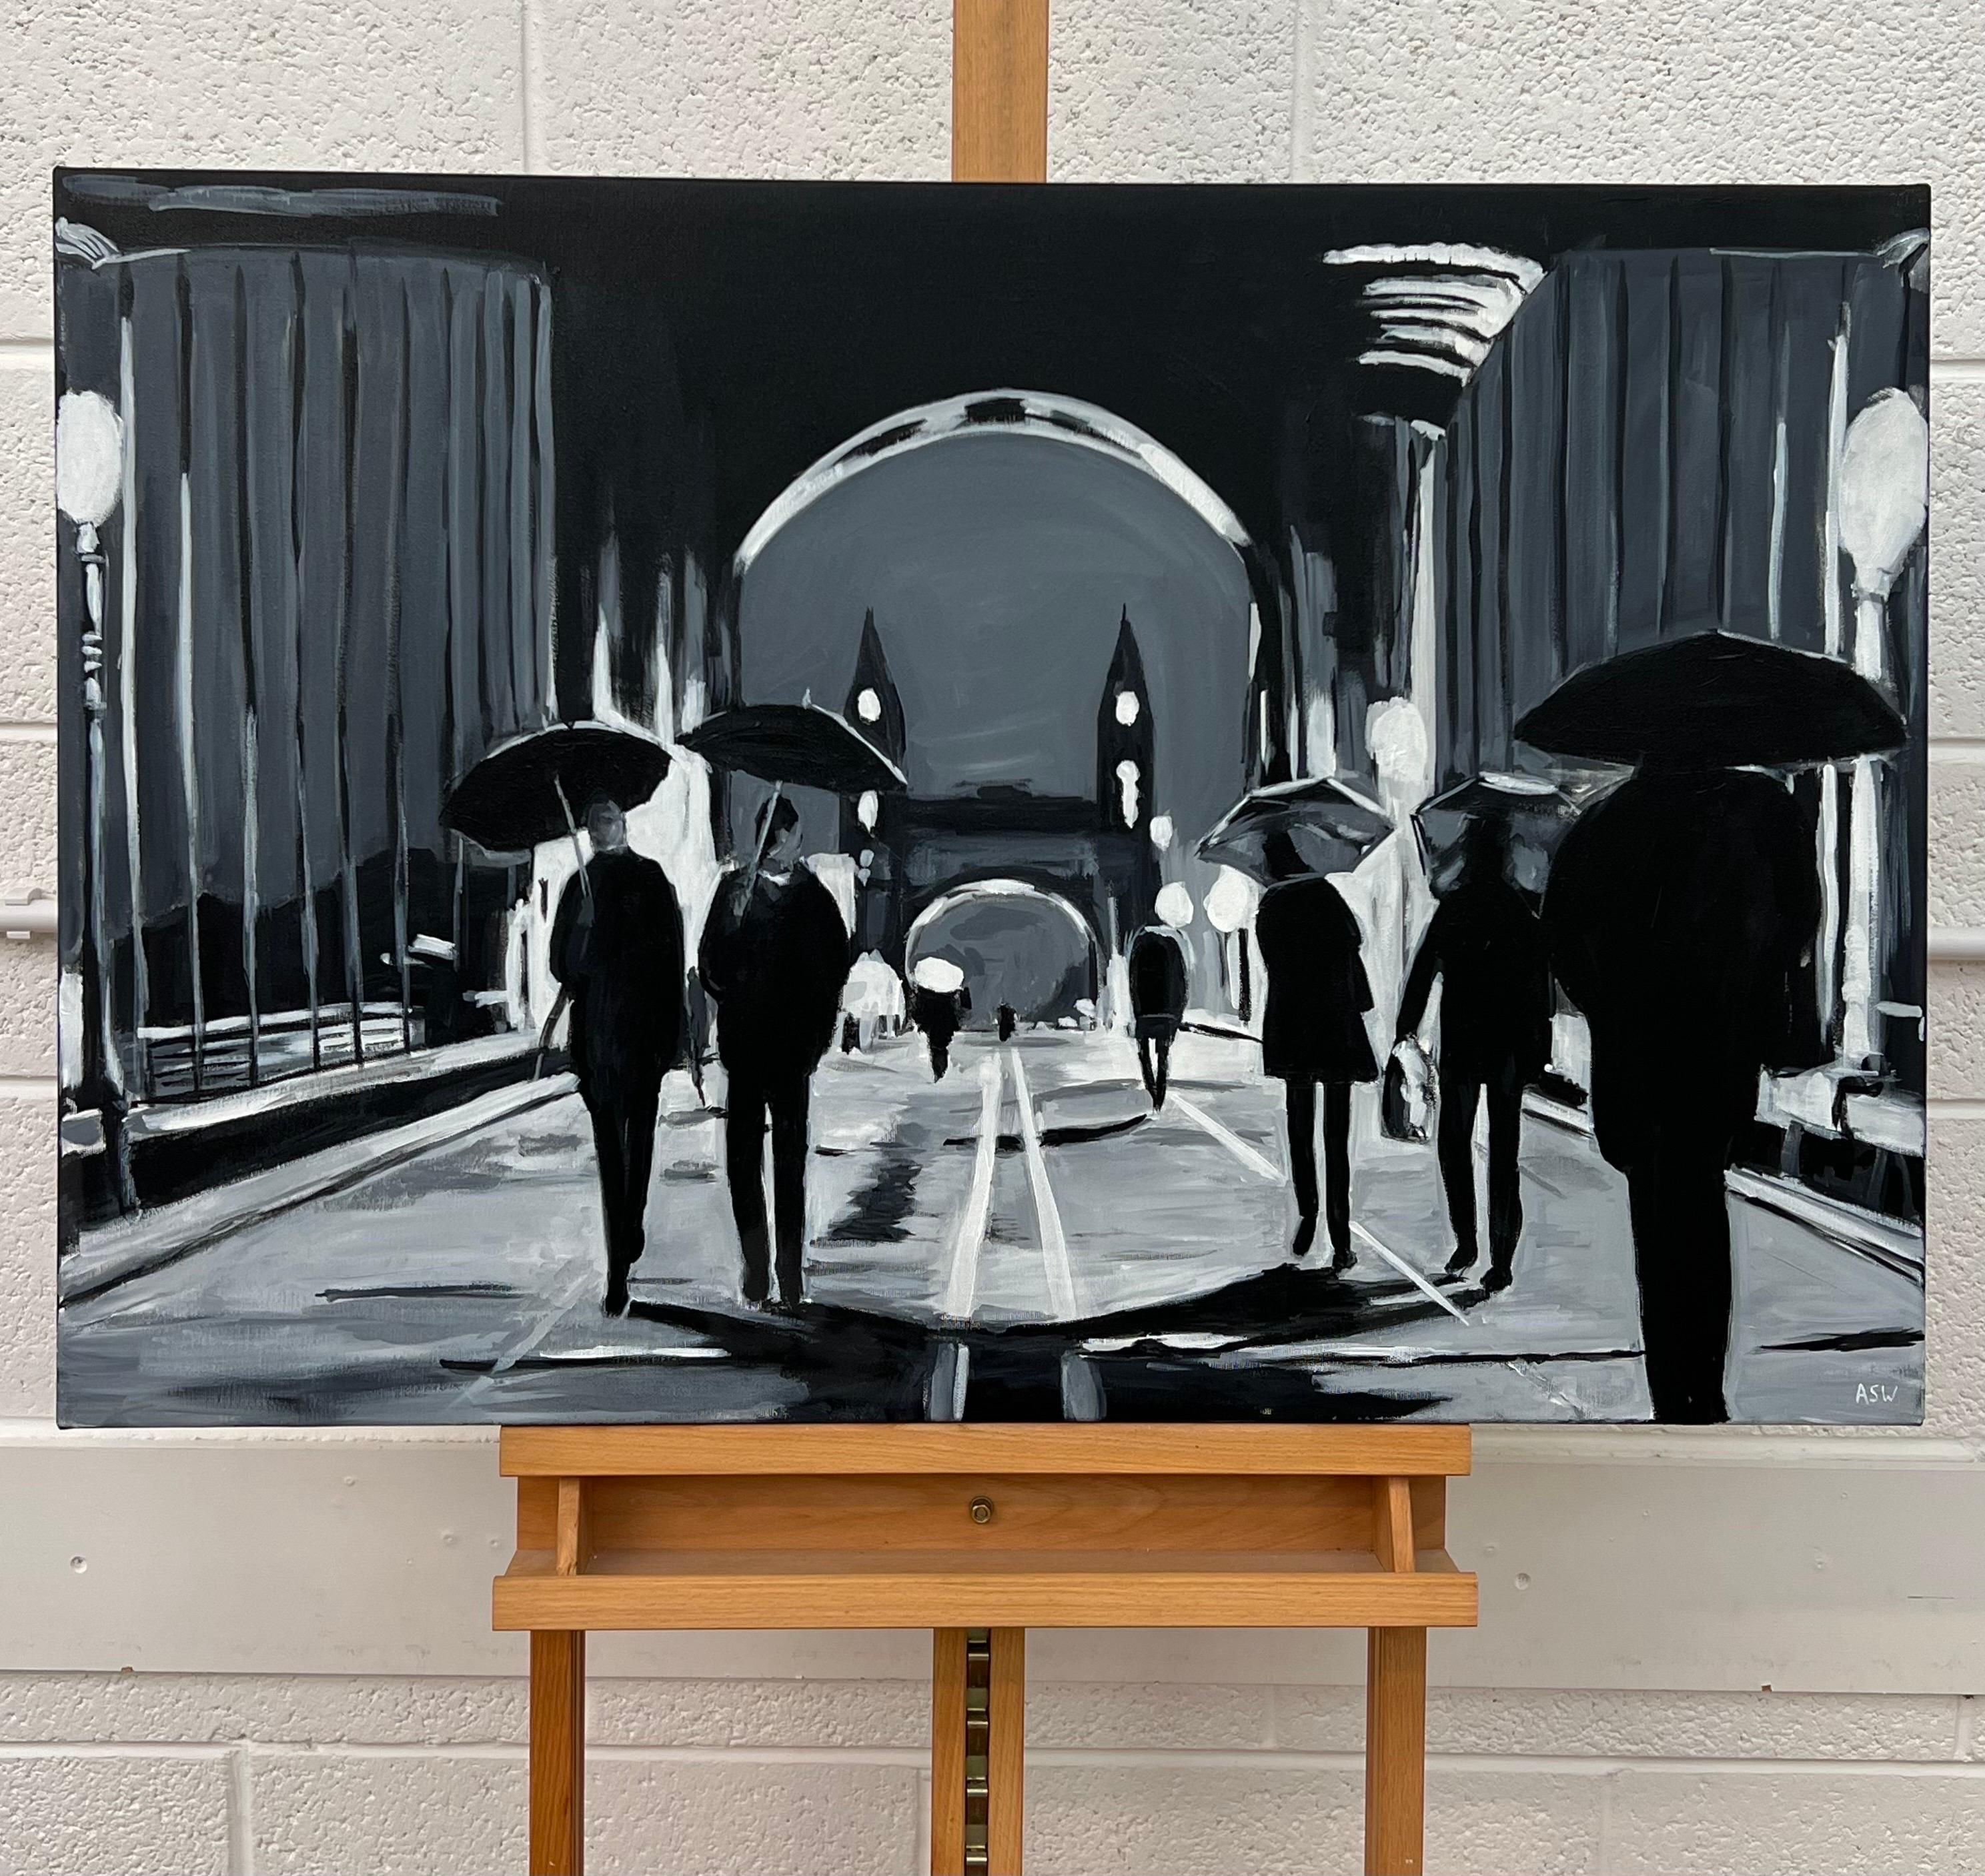 Black & White Painting of Figures at Hammersmith Bridge in London - a unique original from leading British Urban Landscape & Cityscape Artist, Angela Wakefield.

Art measures 36 x 24 inches

Angela Wakefield has twice been on the front cover of ‘Art